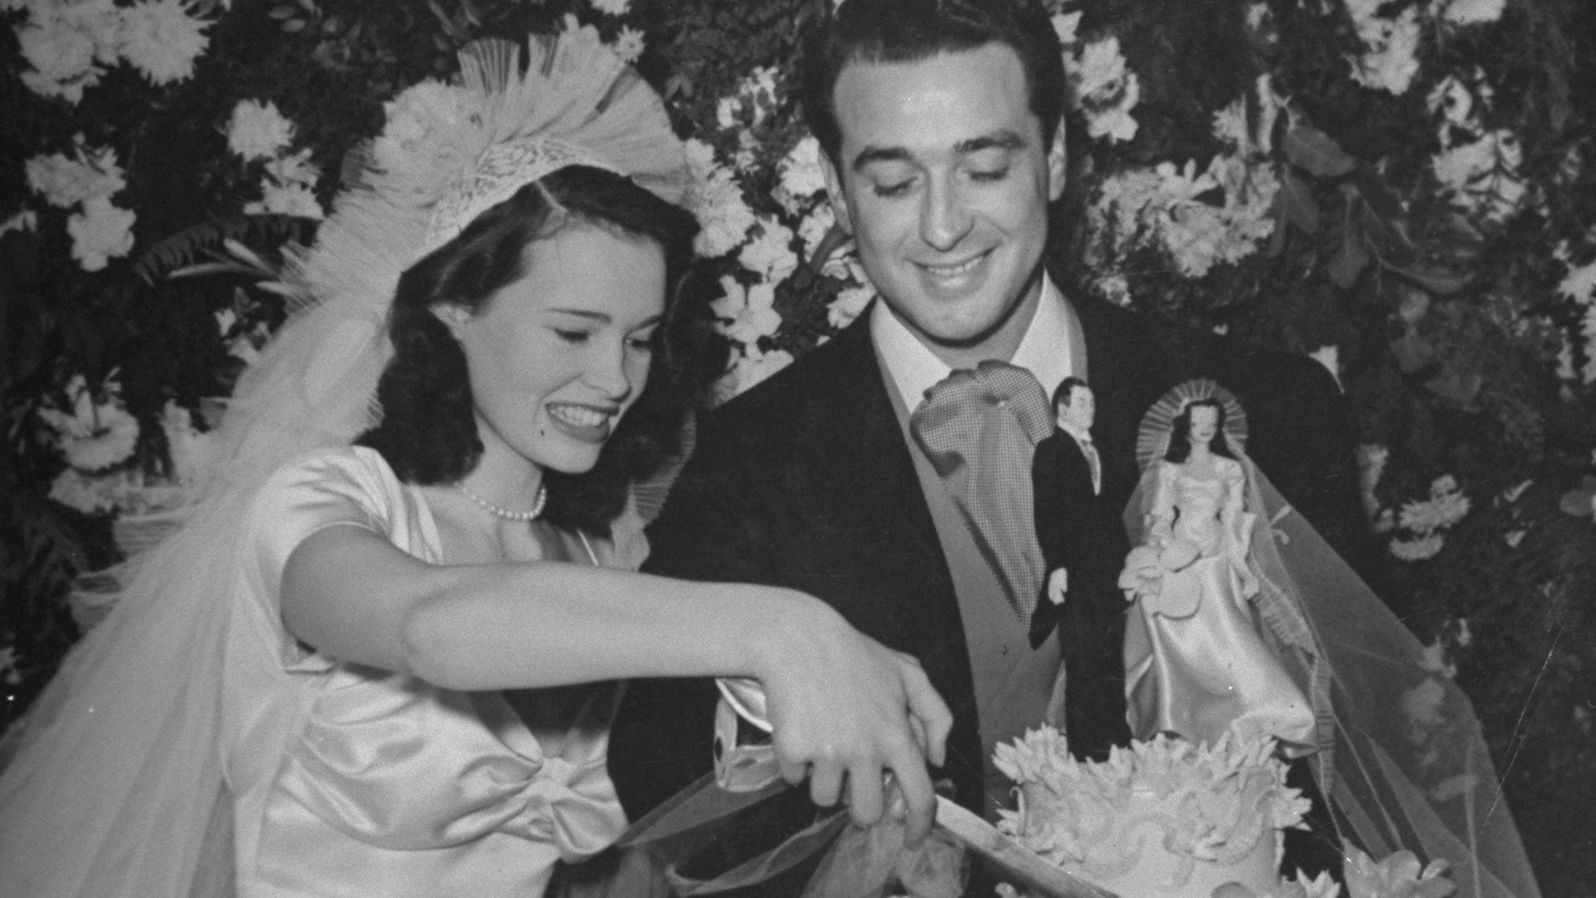 Vanderbilt and her first husband, Hollywood agent Pat DiCicco, cut their wedding cake in 1941. Vanderbilt was 17. At 21, she took control of a $4.3 million trust fund her father had left her. She divorced DiCicco two months later and promptly remarried — this time to conductor Leopold Stokowski, who was 63 at the time.